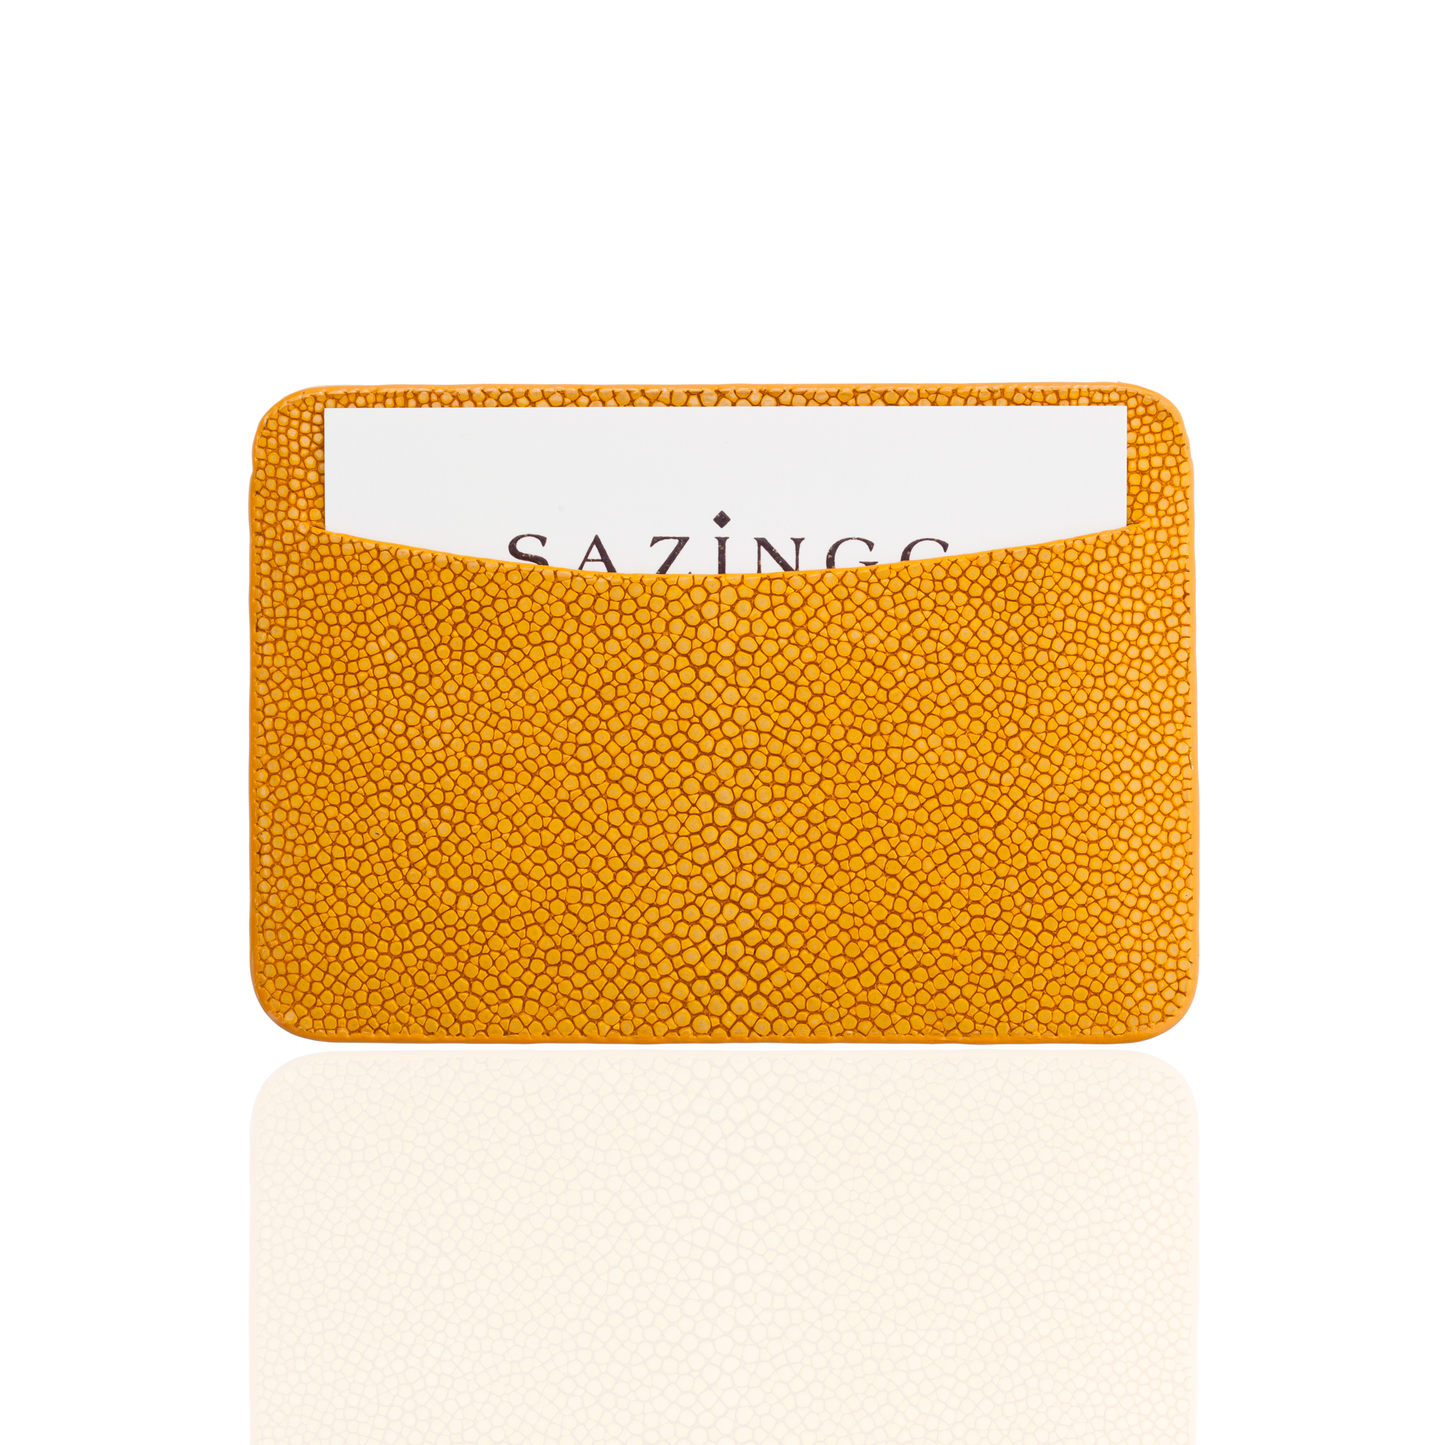 Credit Card Pouch in Yellow Stingray Leather